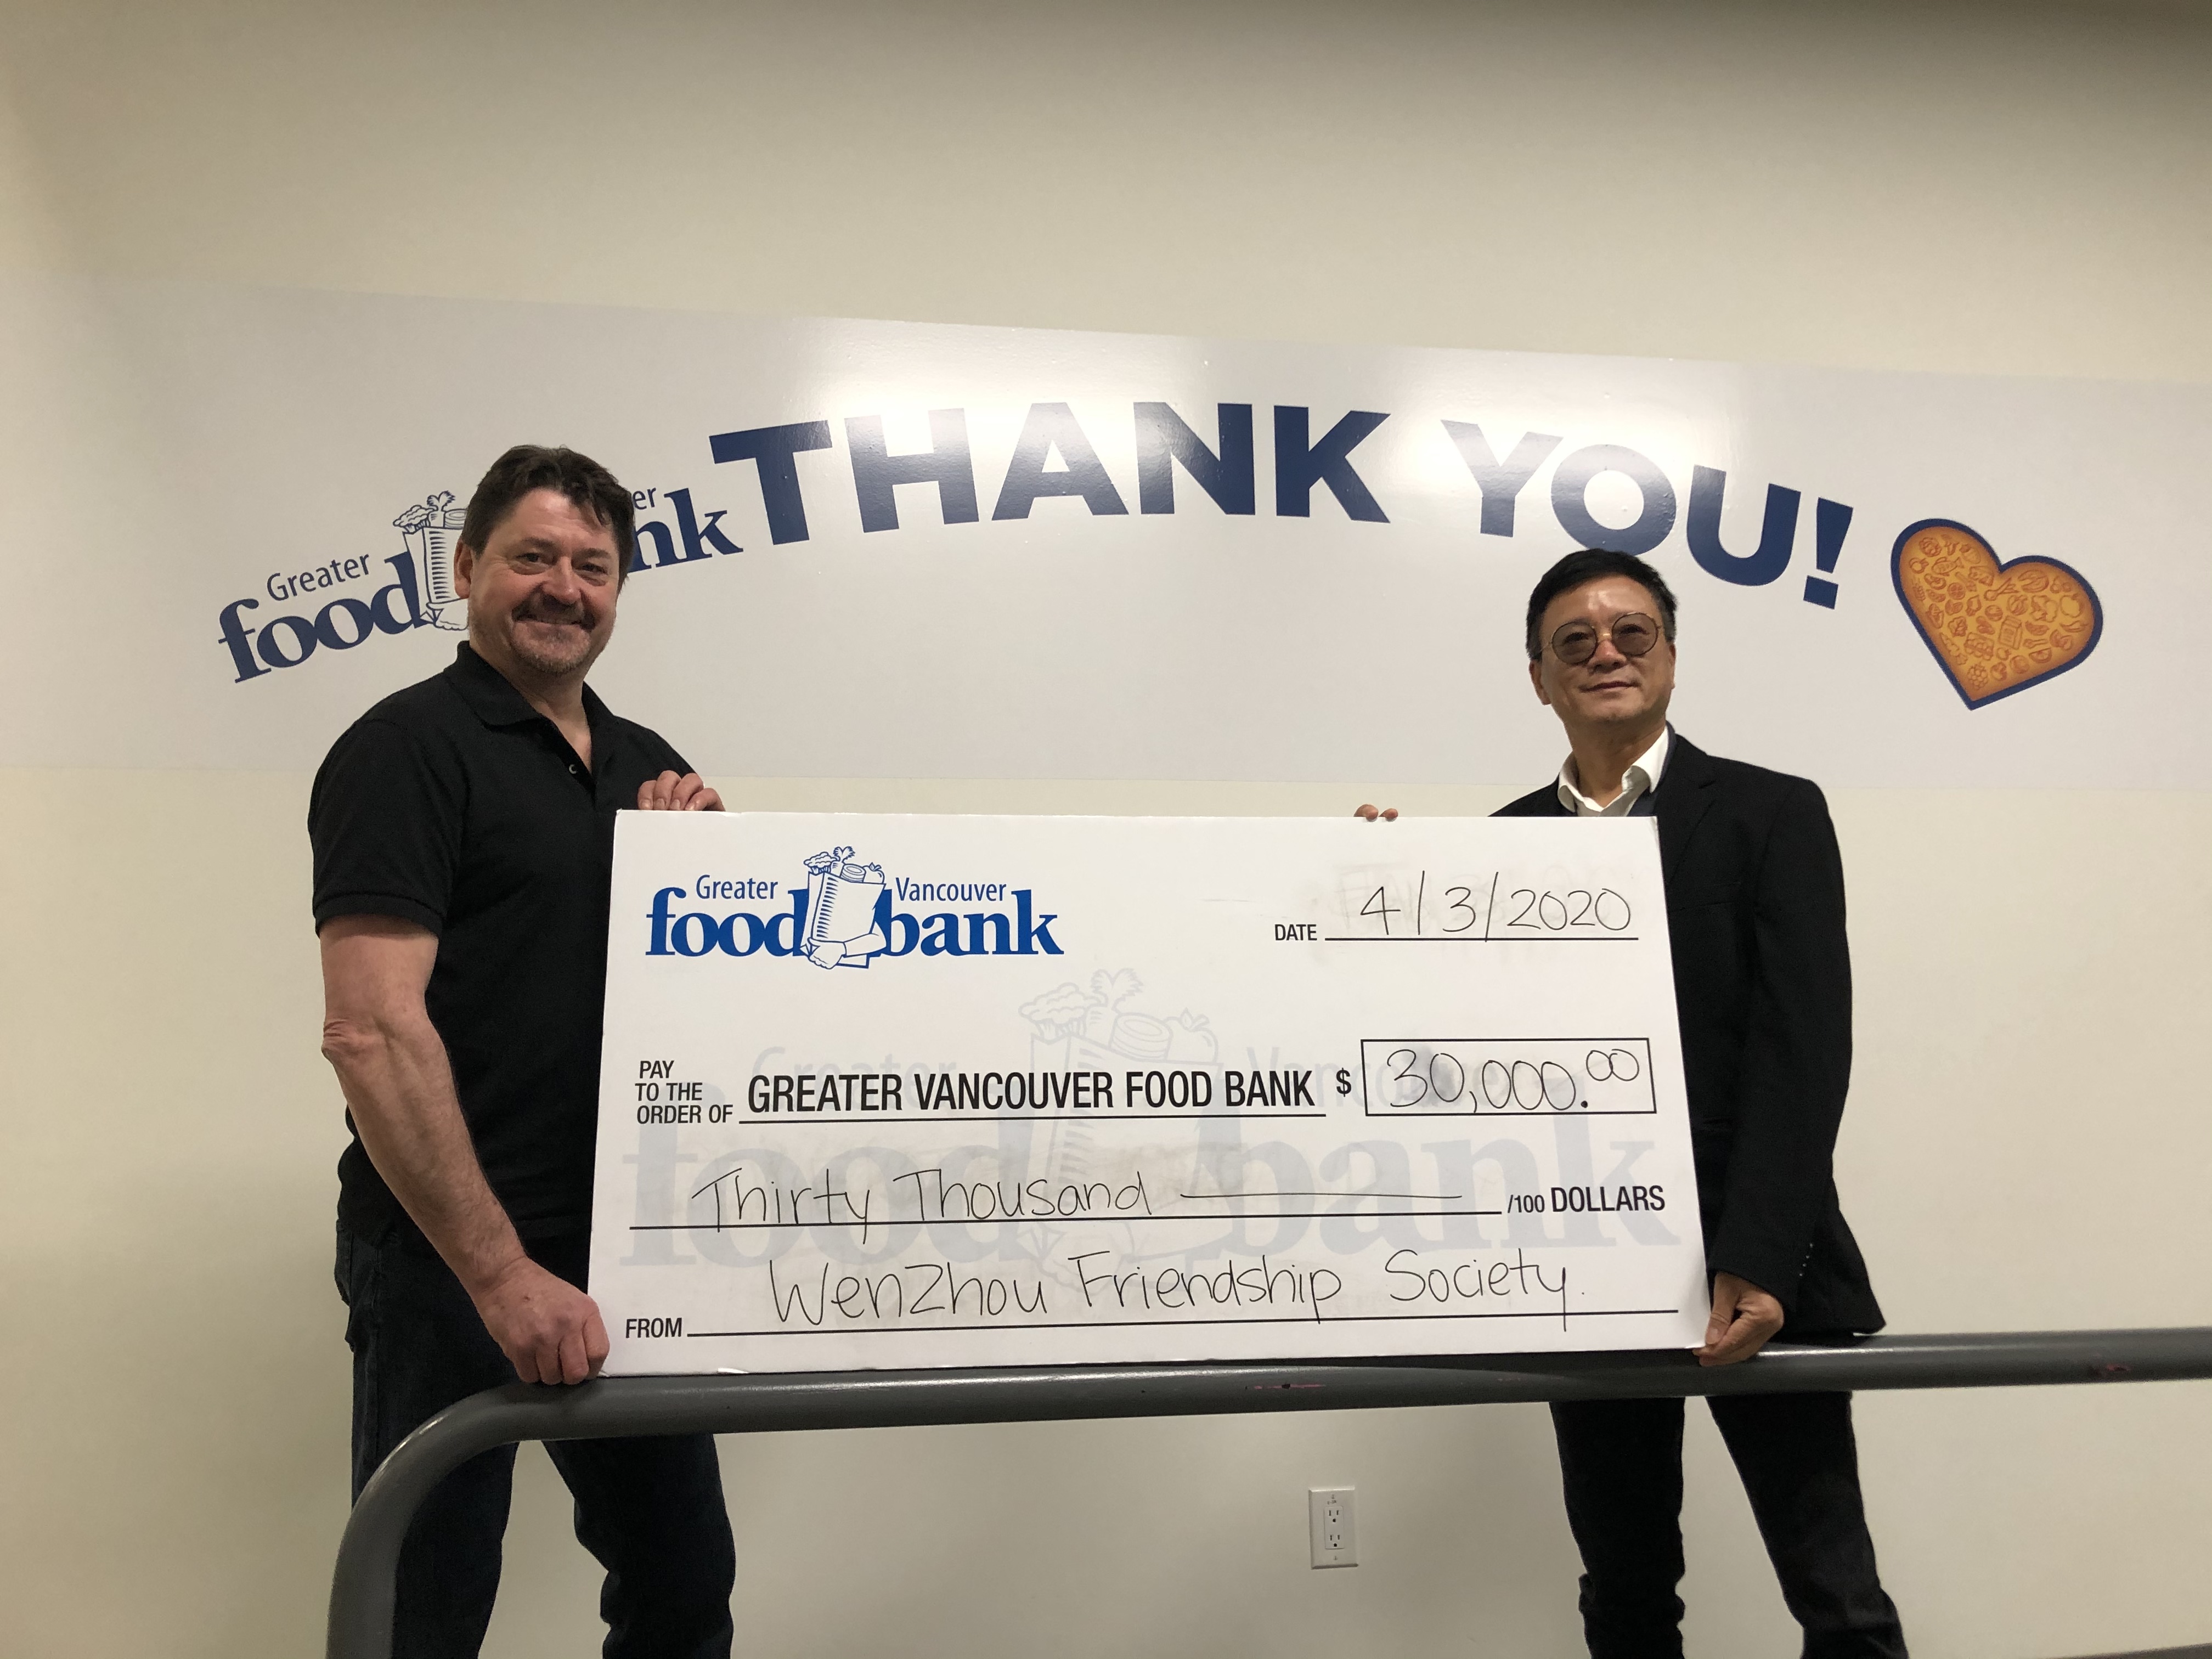 Generous donation to Greater Vancouver Food Bank